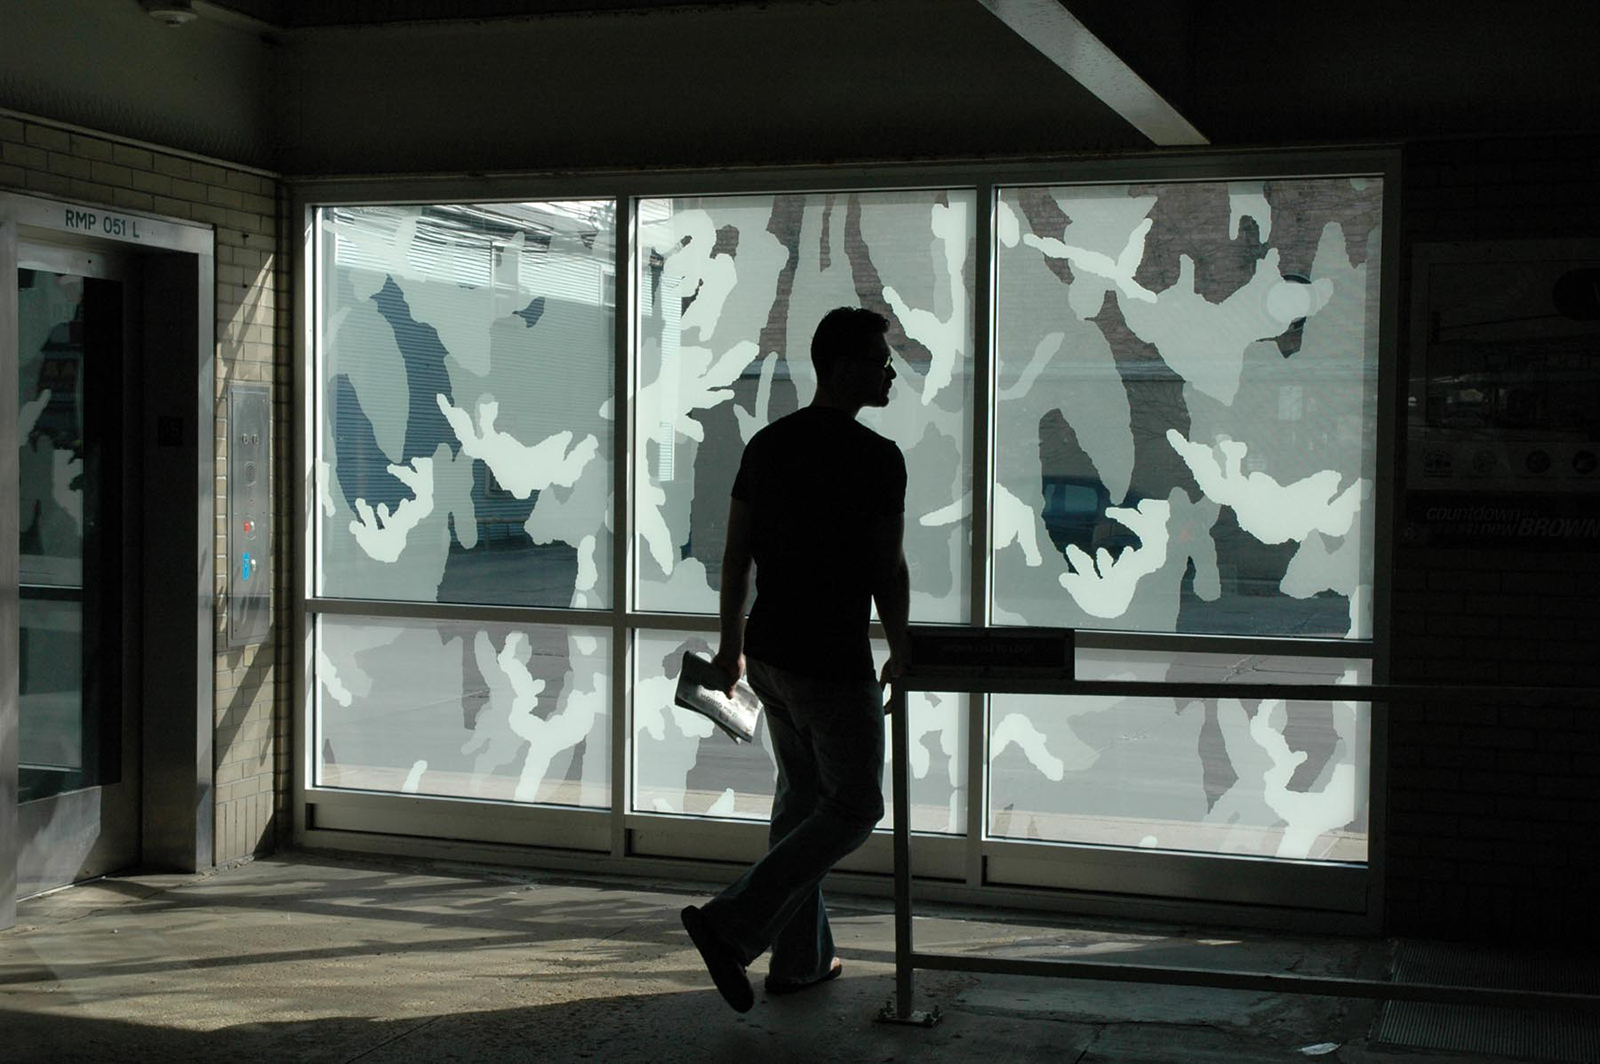  Shadow Screens: interior view, Western Avenue Station, Chicago 2007 